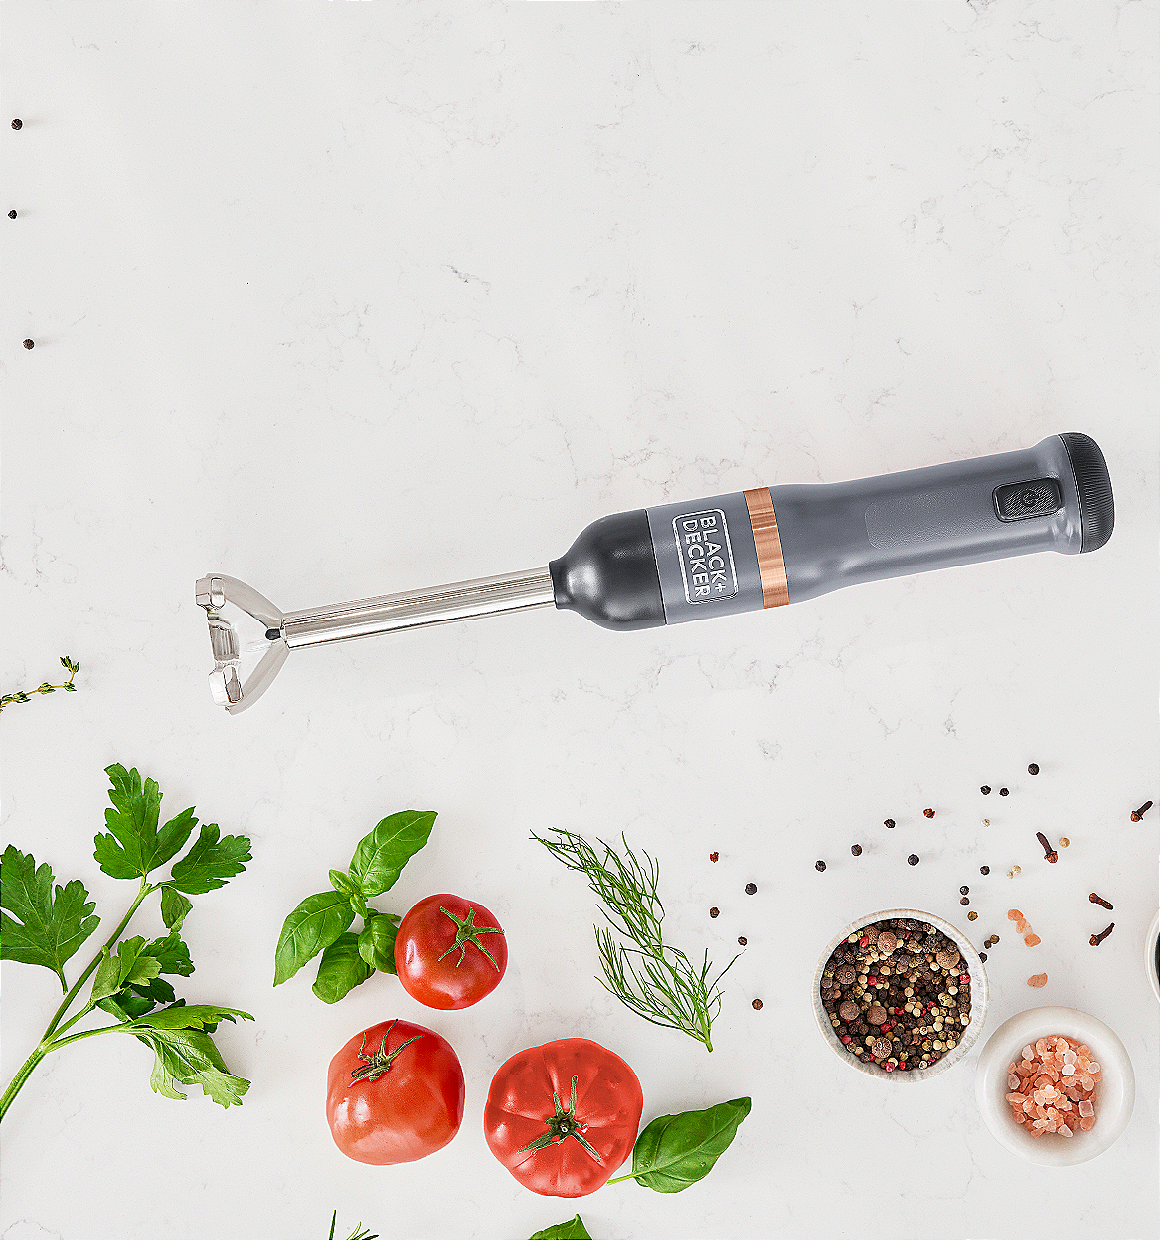  BLACK+DECKER Kitchen Wand Cordless Immersion Blender, 3 in 1  Multi Tool Set, Hand Blender with Charging Dock, Whisk, and Chopper, Red  (BCKM1013K06): Home & Kitchen